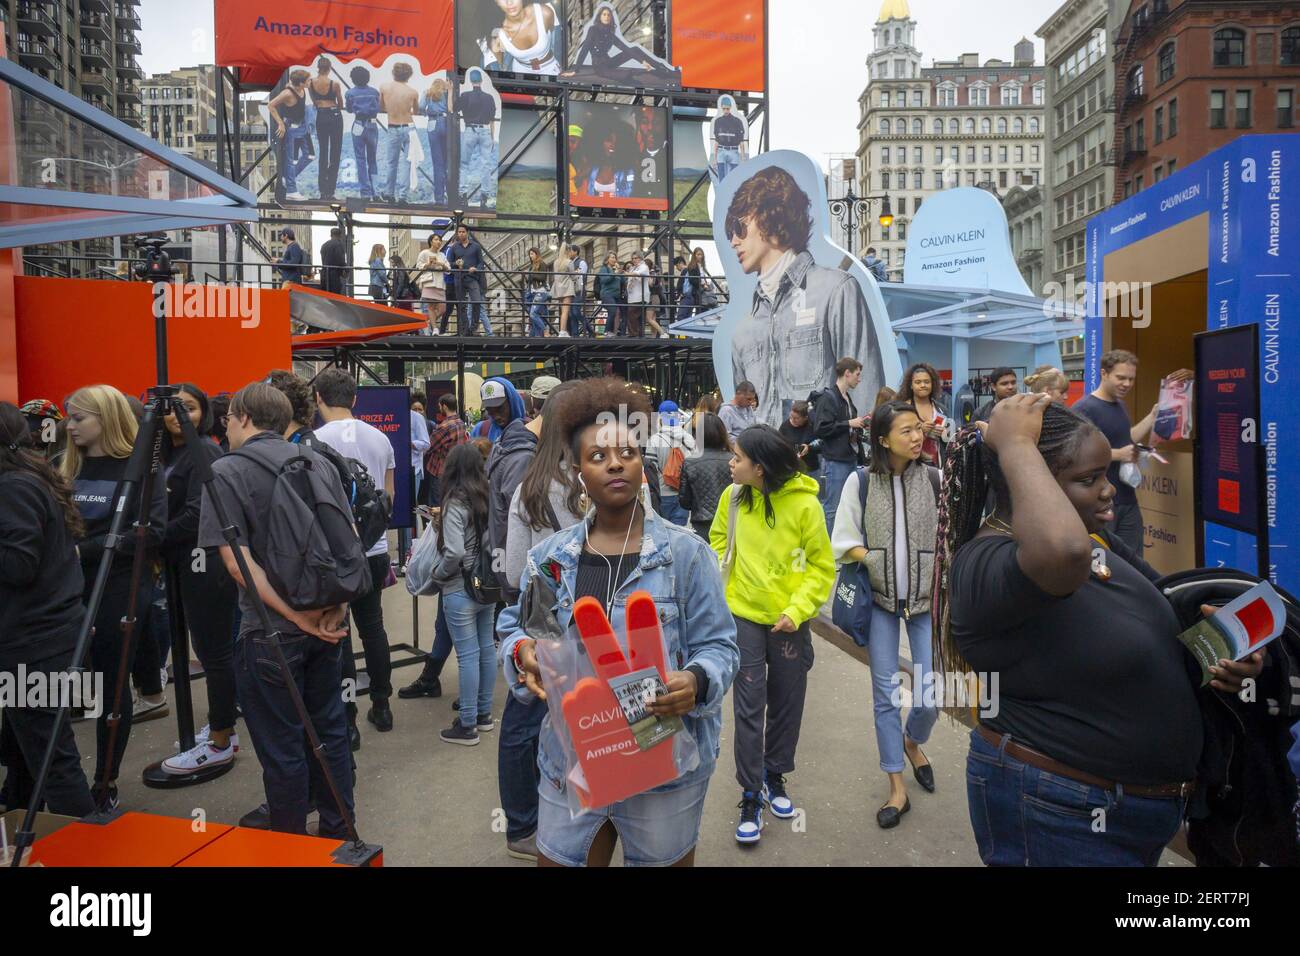 Hundreds of visitors flock to the Calvin Klein X Amazon Fashion  collaboration branding event in Flatiron Plaza in New York on Saturday,  October 6, 2018. Visitors were treated to a number of "experiences"  including games, product drops and a popcorn selfie ...